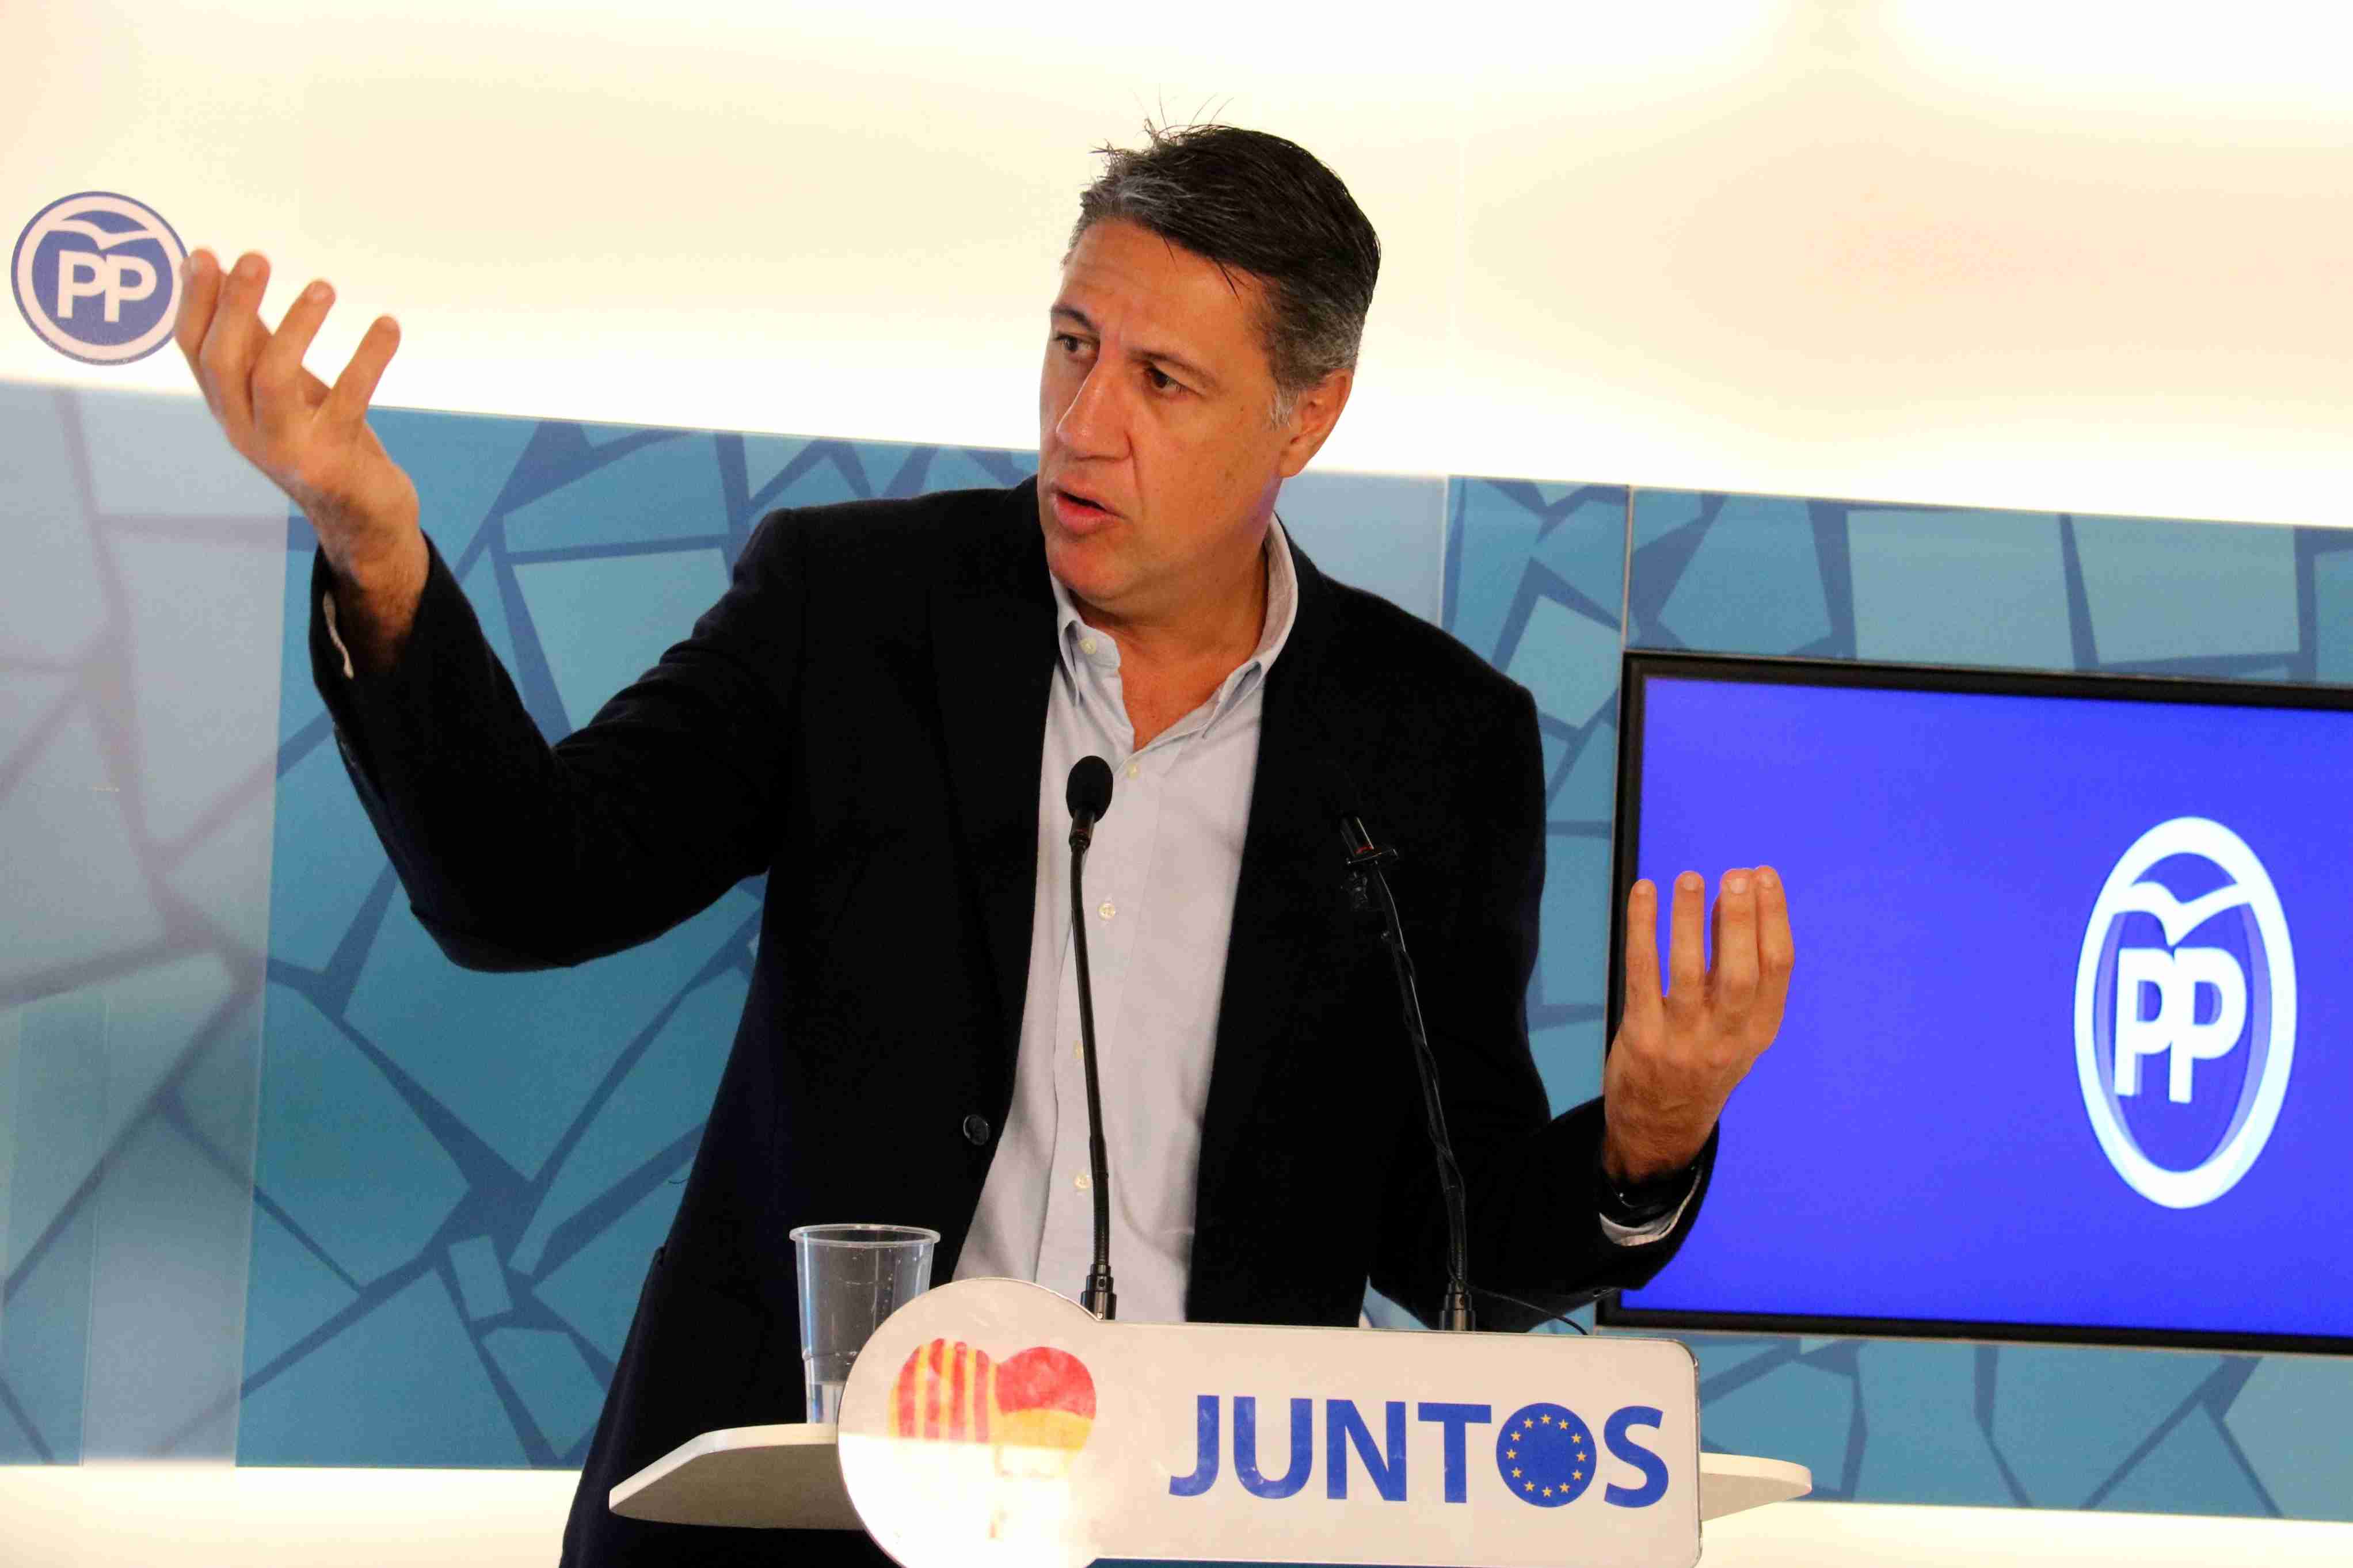 PP leader wants to close Catalan TV3 and open new public TV "with normal people"